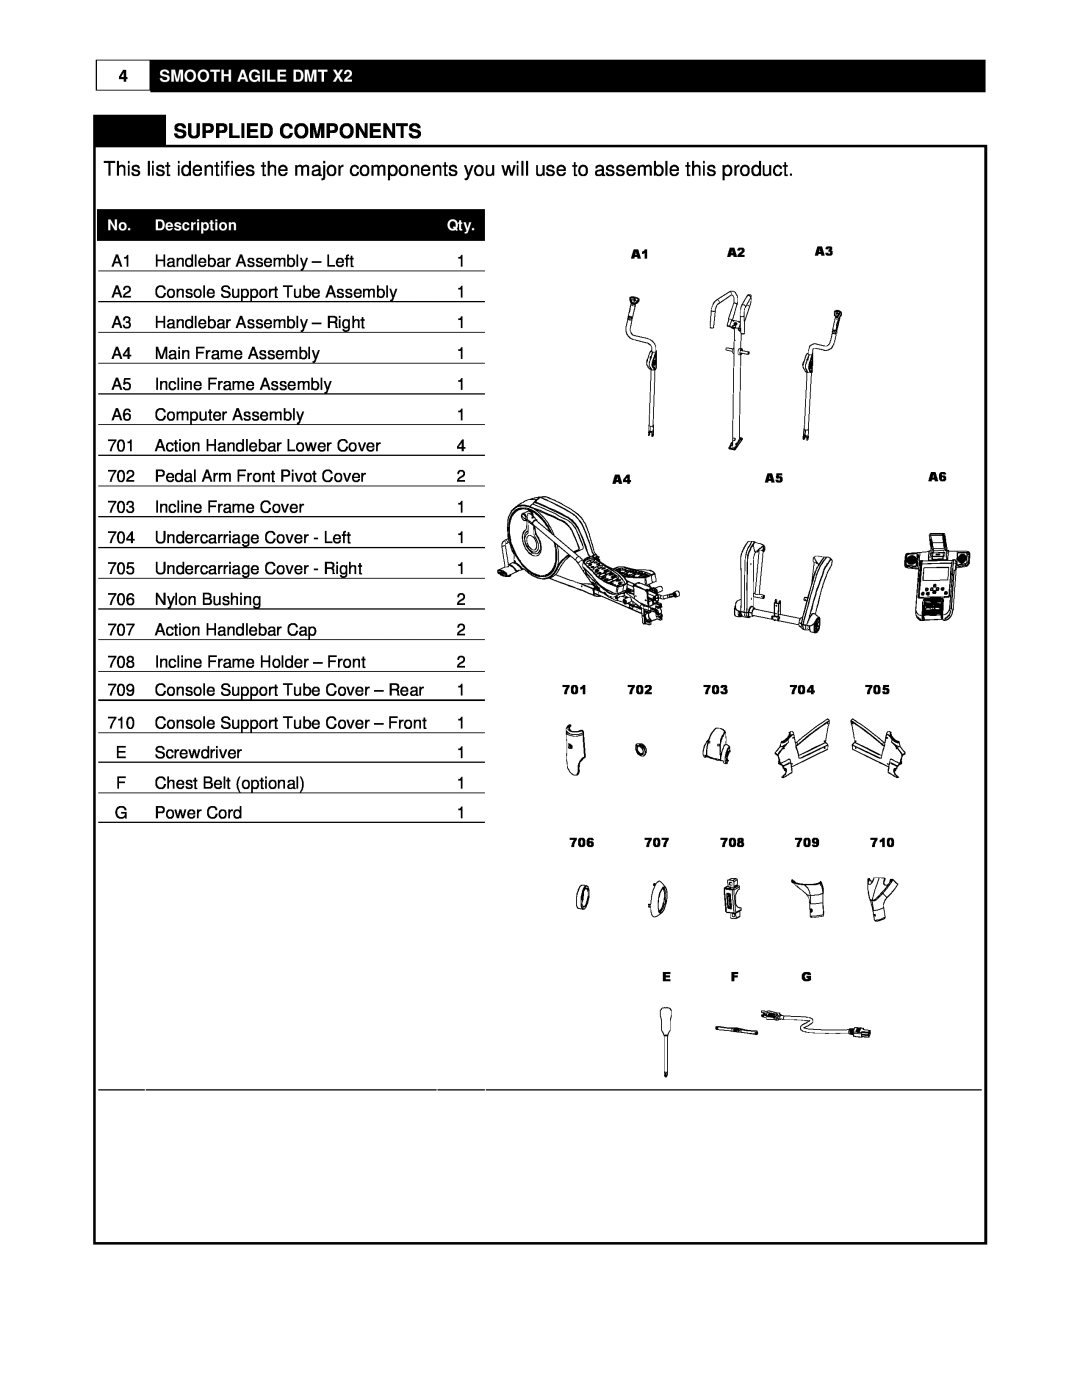 Smooth Fitness DMT X2 user manual Supplied Components, Smooth Agile Dmt 